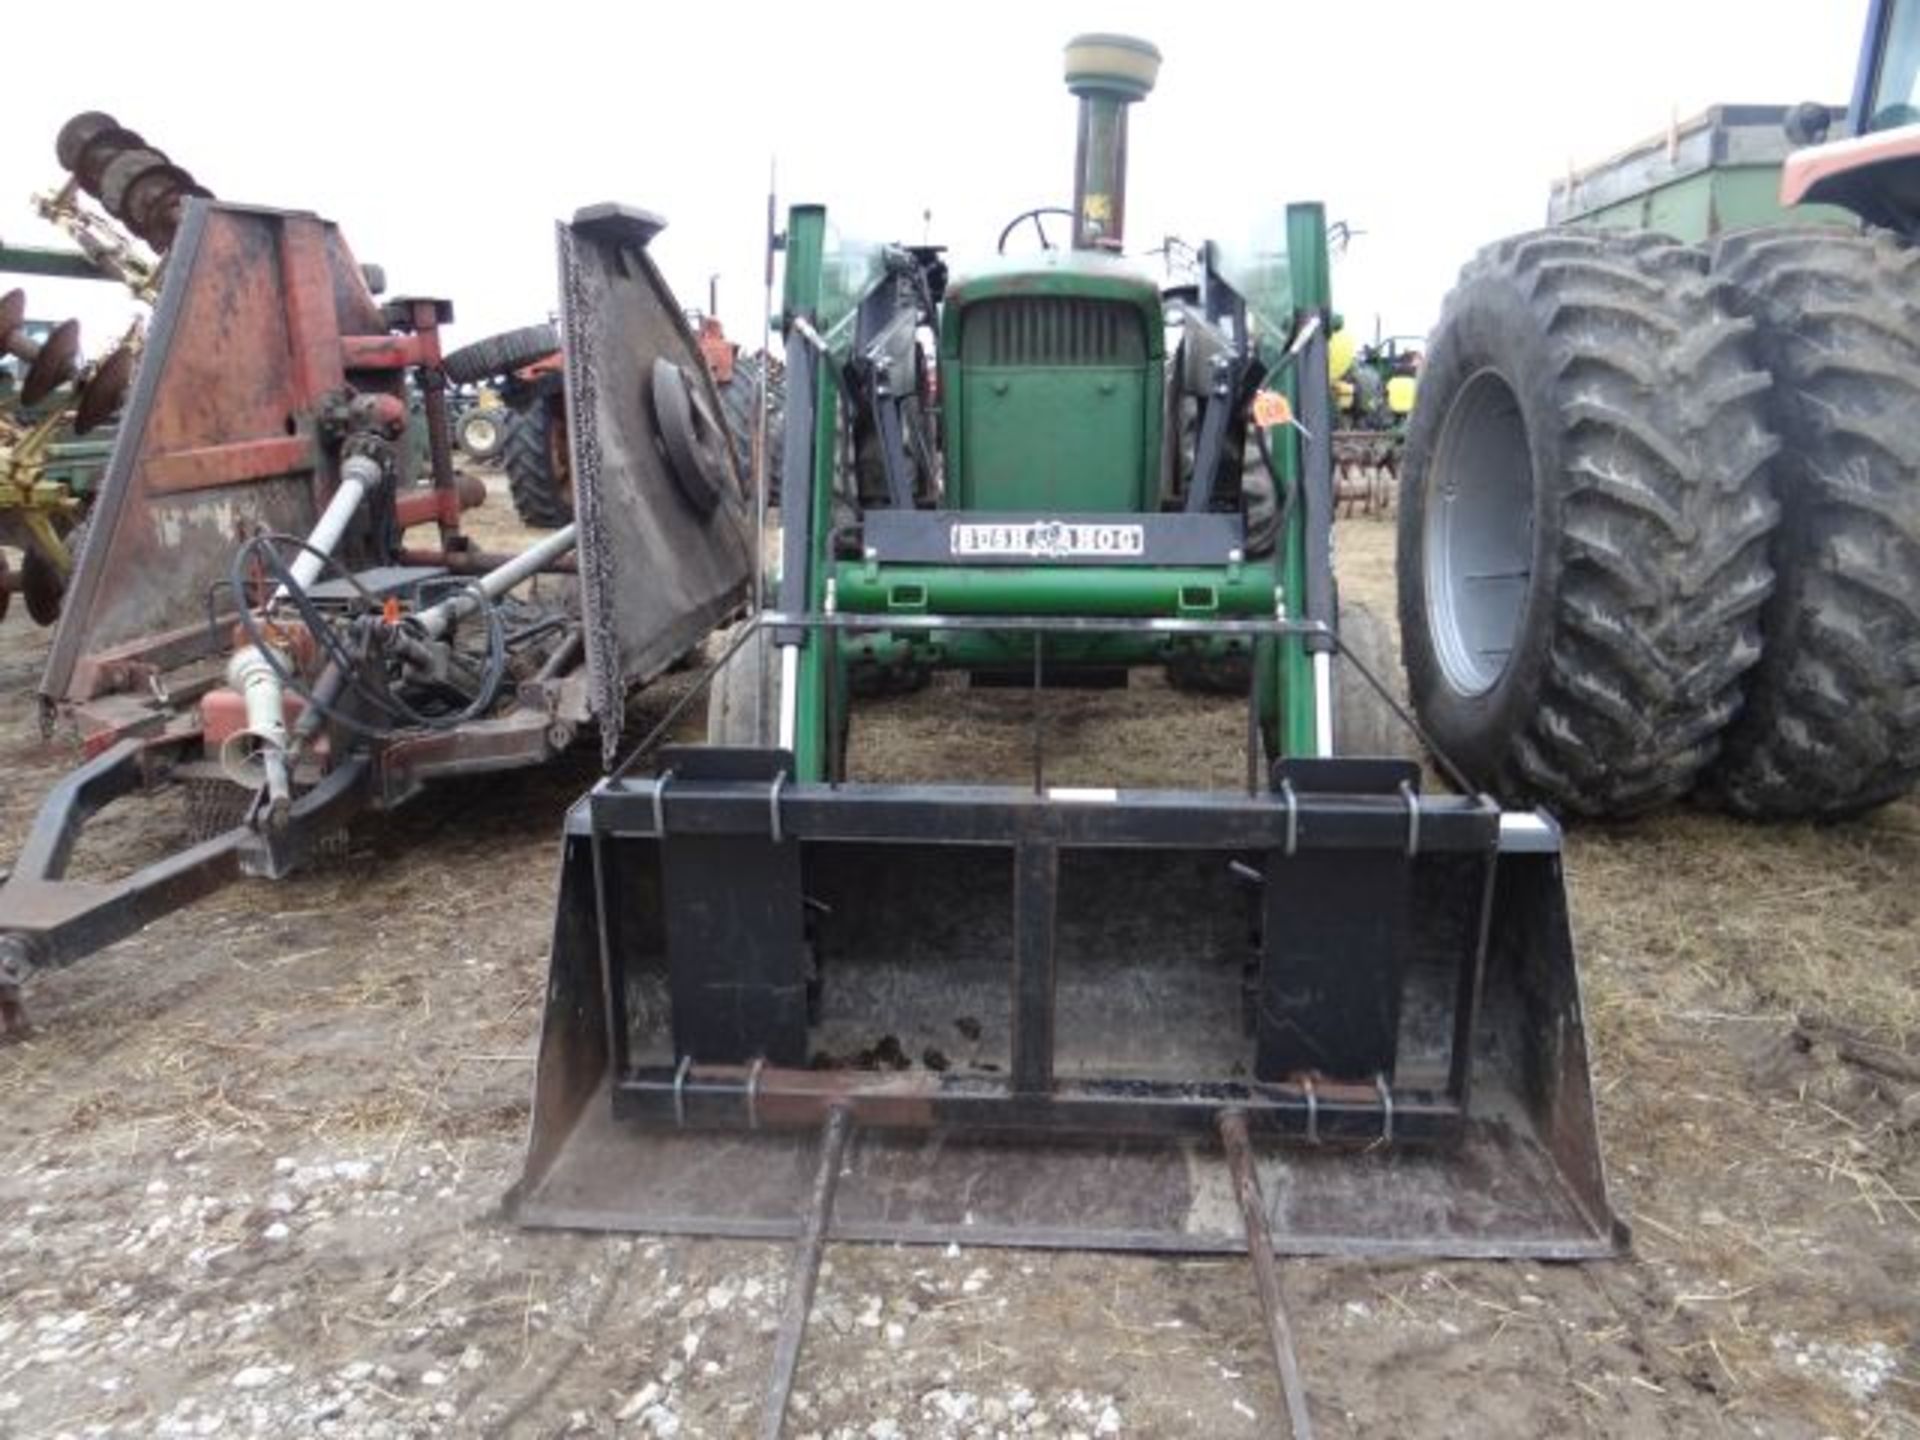 JD 4020 Tractor, 1967 Diesel, Powershift, Hrs are Correct, Trans Overhauled, 300 hrs ago, w/ Bush - Image 5 of 5